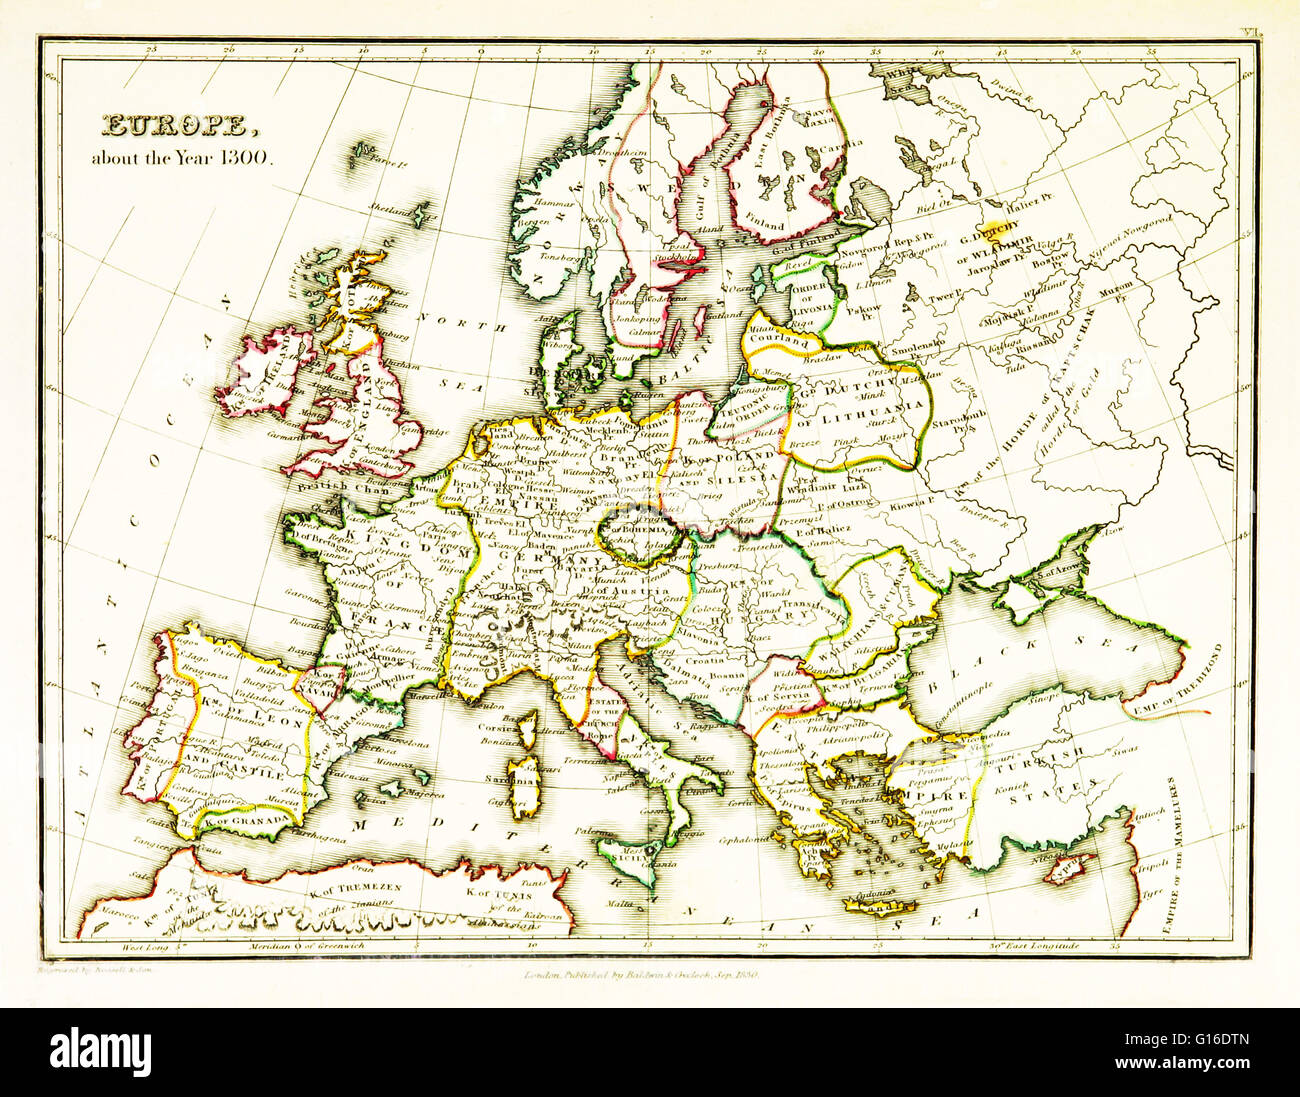 A map of Europe, showing territorial borders existing in the 14th century, specifically 1300. Map published in 1831. Stock Photo